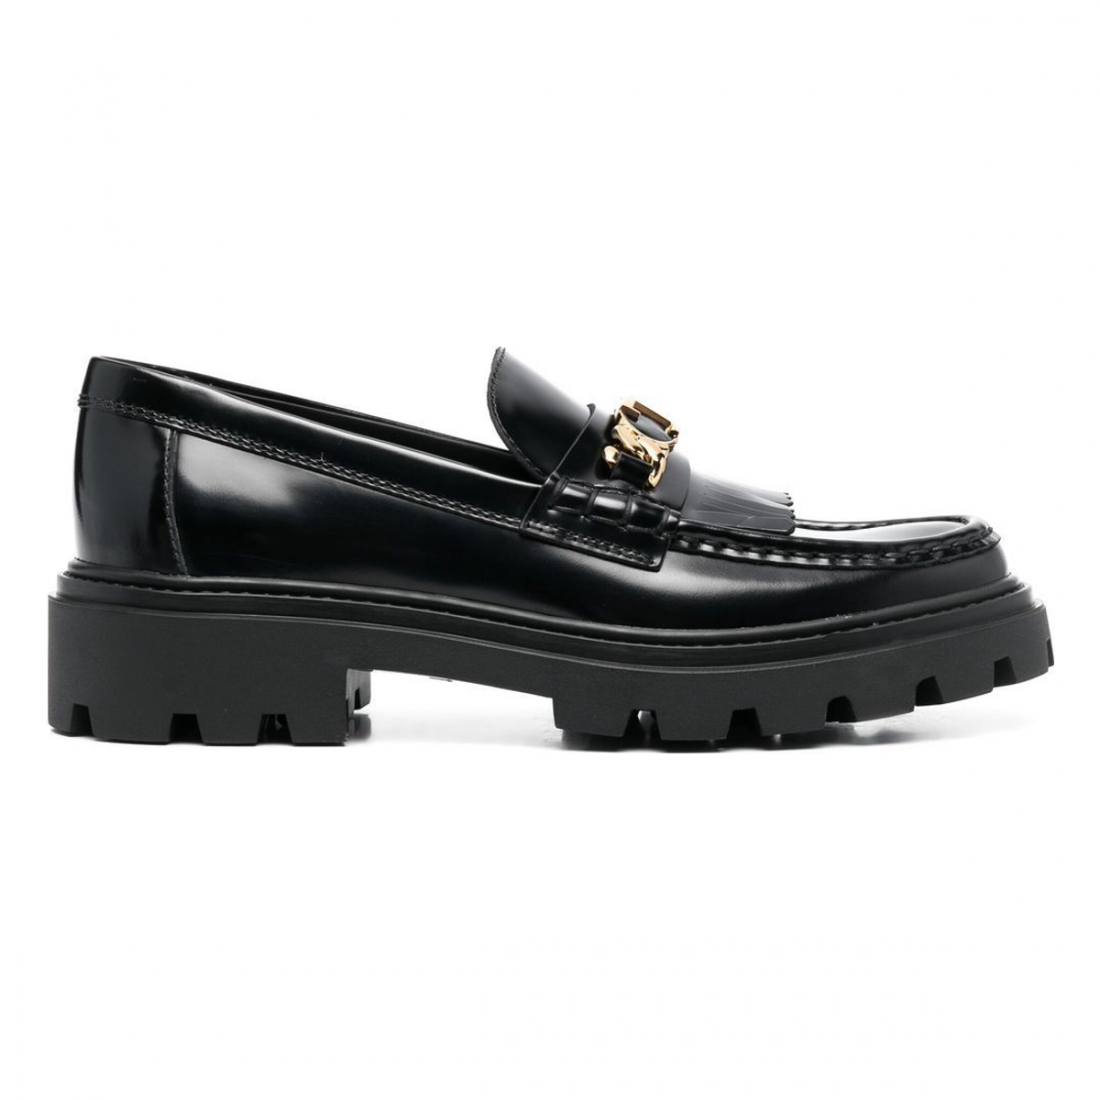 Women's '3D Chain Fringed' Loafers